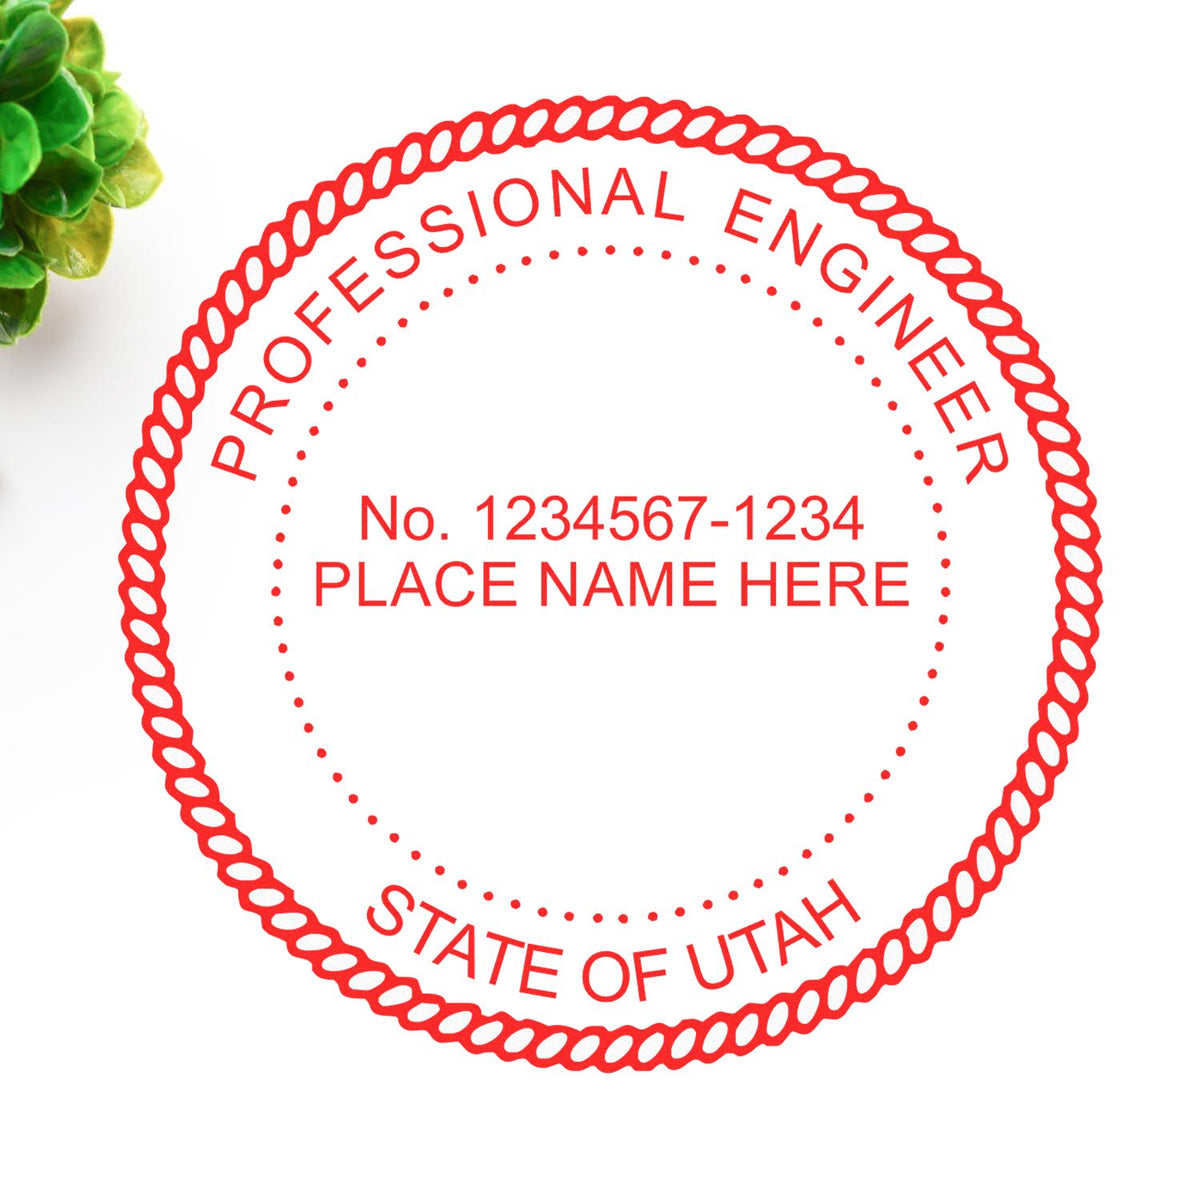 A photograph of the Digital Utah PE Stamp and Electronic Seal for Utah Engineer stamp impression reveals a vivid, professional image of the on paper.